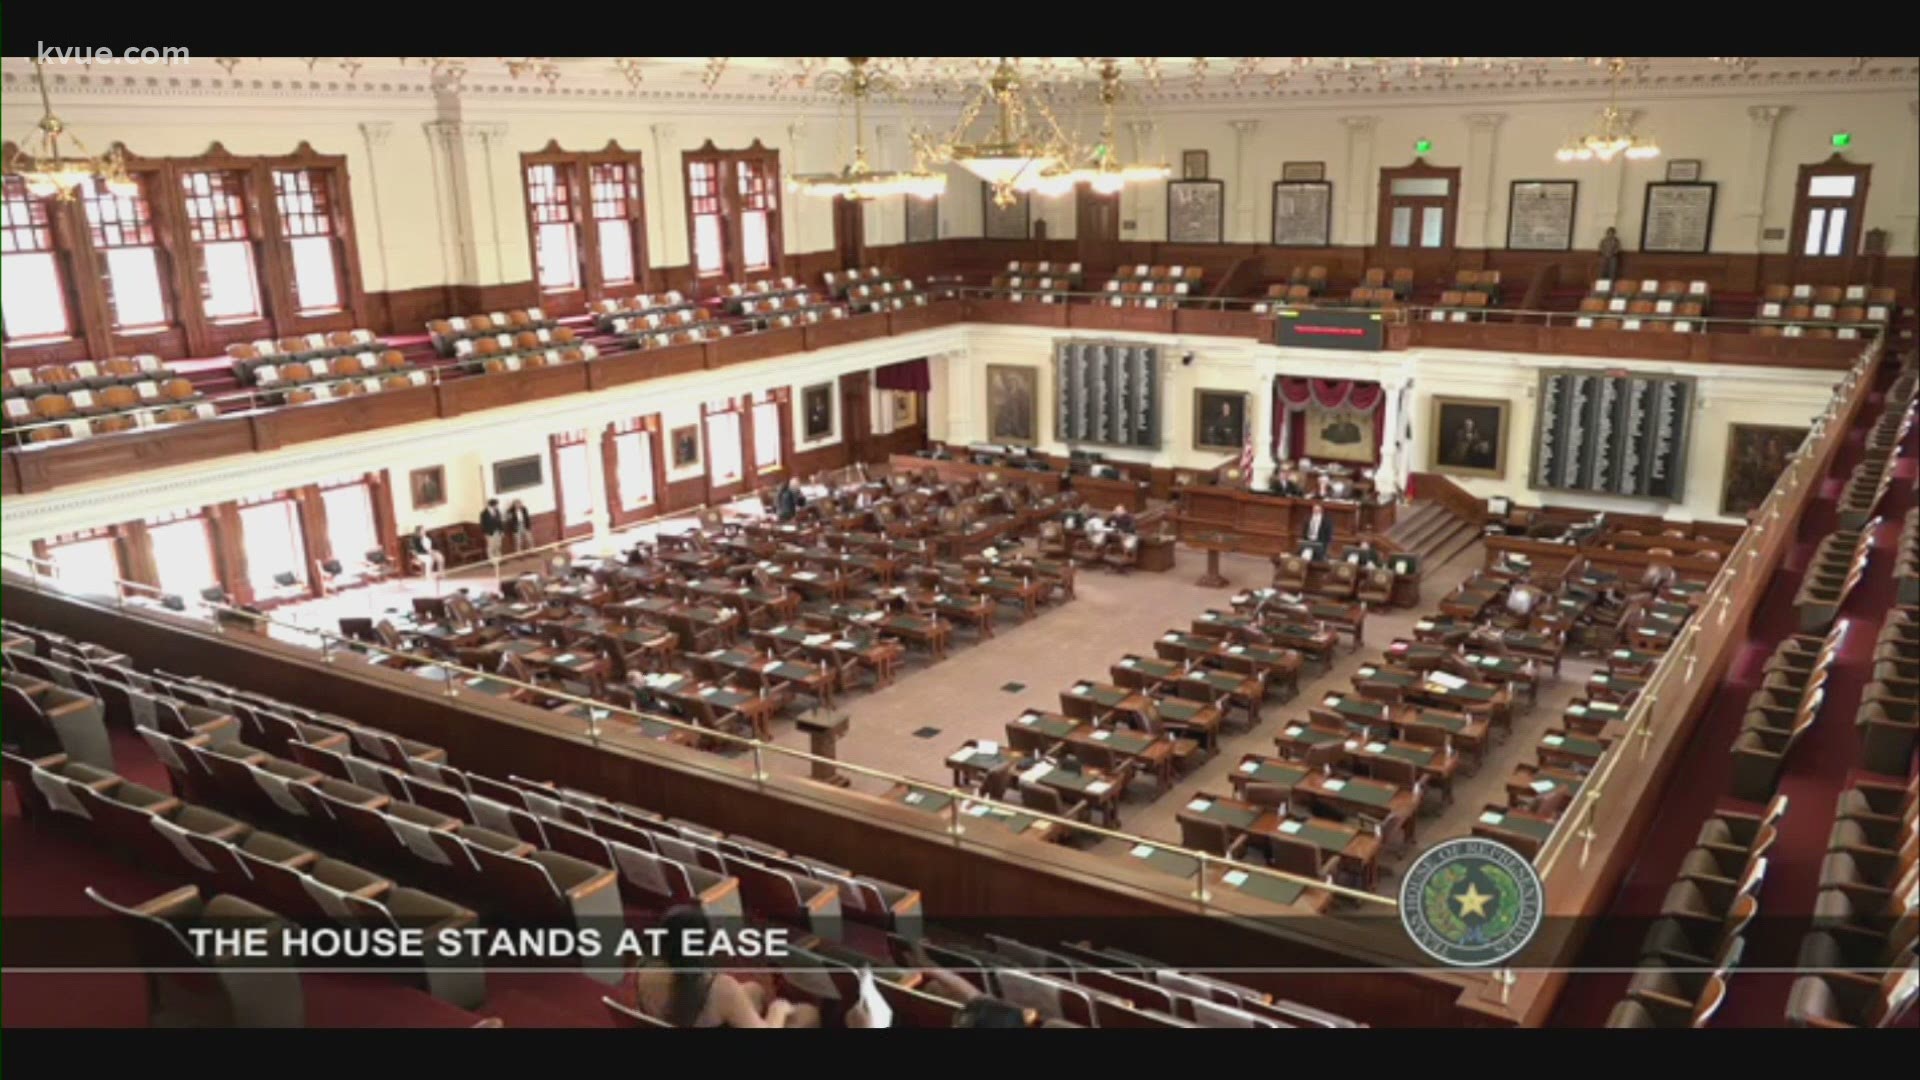 A day after House Democrats left the state to break quorum, the Texas Senate passed its version of a controversial voting bill. It goes to the House now.